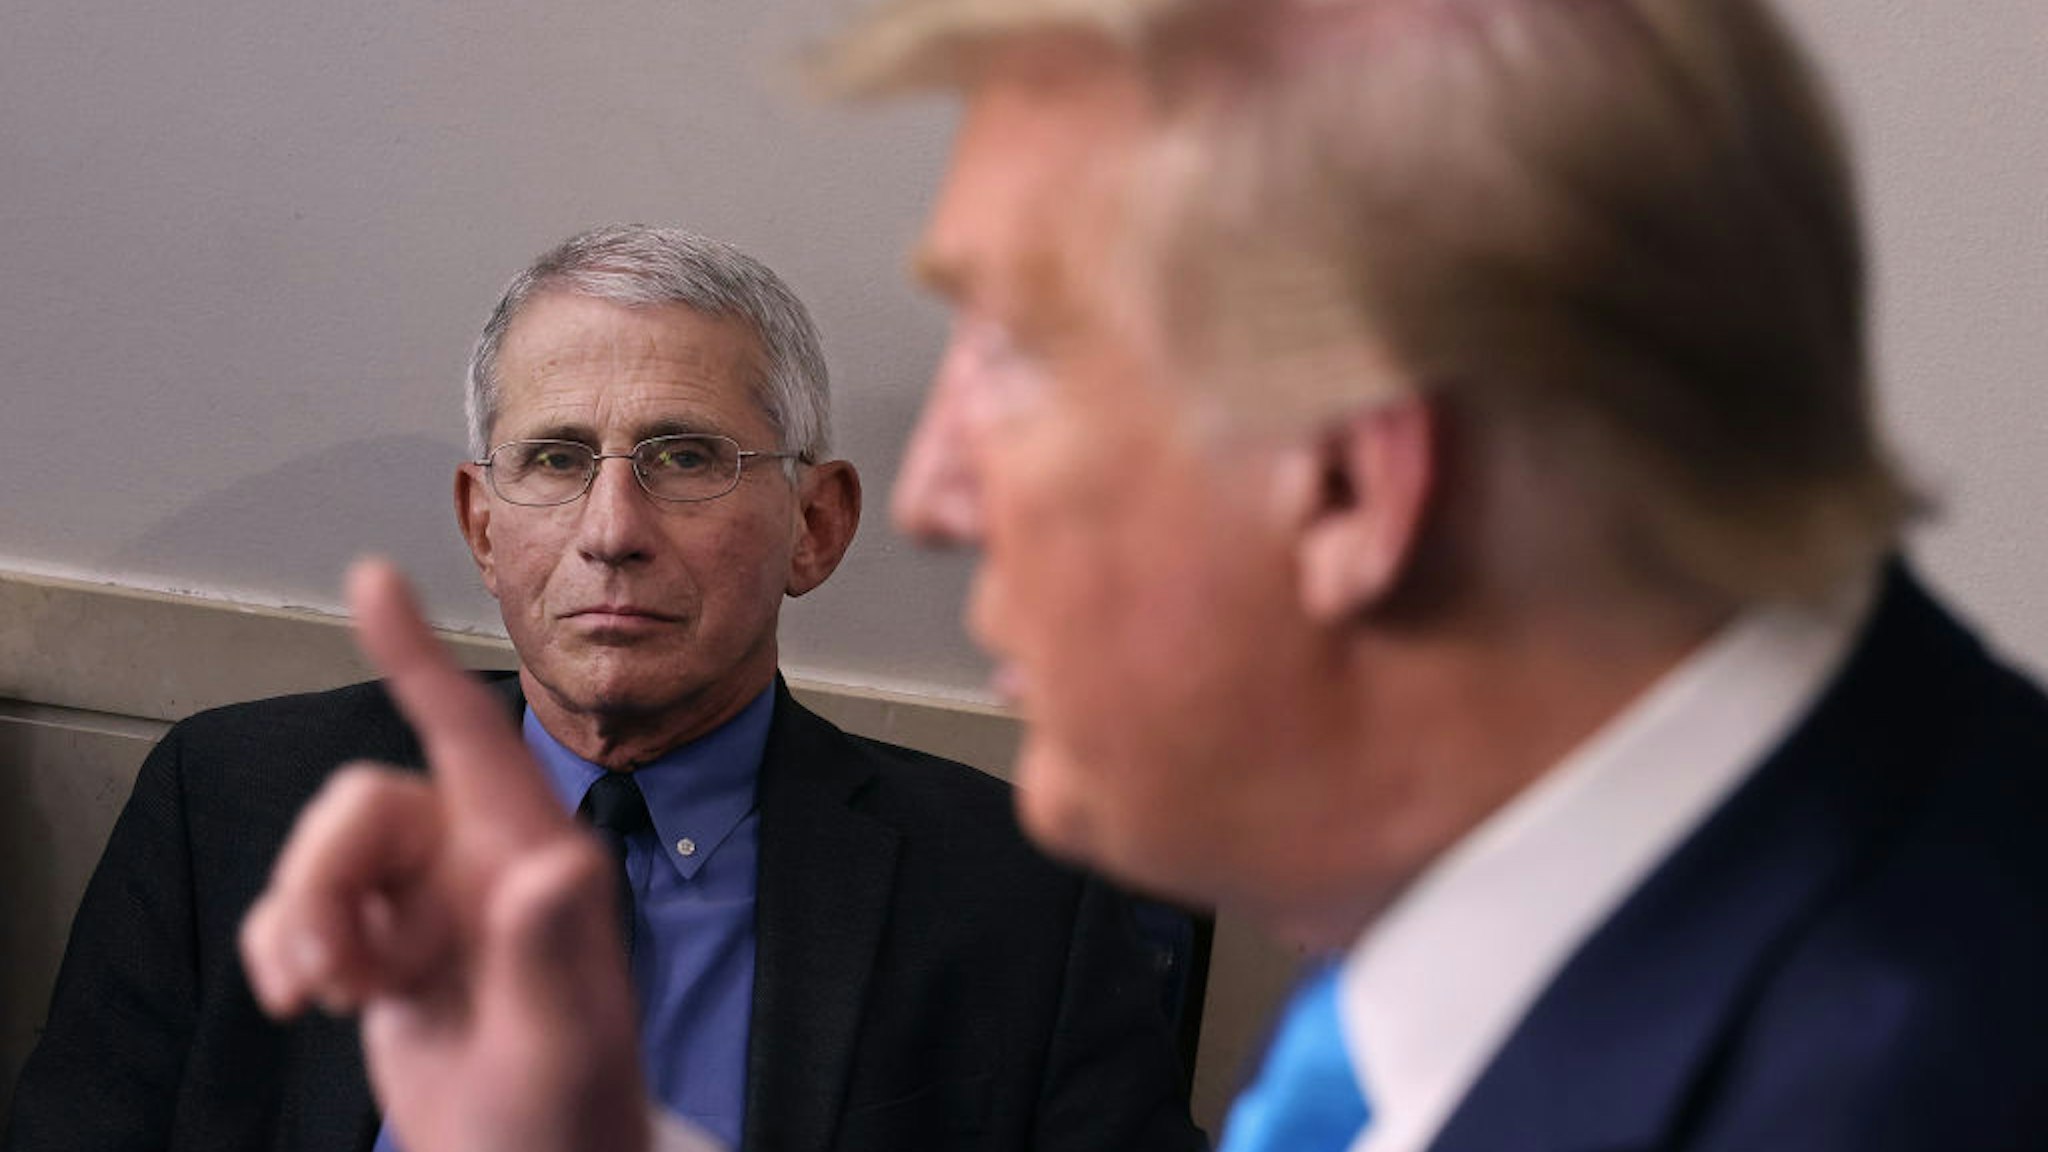 Anthony Fauci, director of the National Institute of Allergy and Infectious Diseases, listens to U.S. President Donald Trump speak to reporters following a meeting of the coronavirus task force in the Brady Press Briefing Room at the White House on April 7, 2020 in Washington, DC. The president today removed the independent chairman of a committee tasked with overseeing the roll out of the $2 trillion coronavirus bailout package. (Photo by Chip Somodevilla/Getty Images)